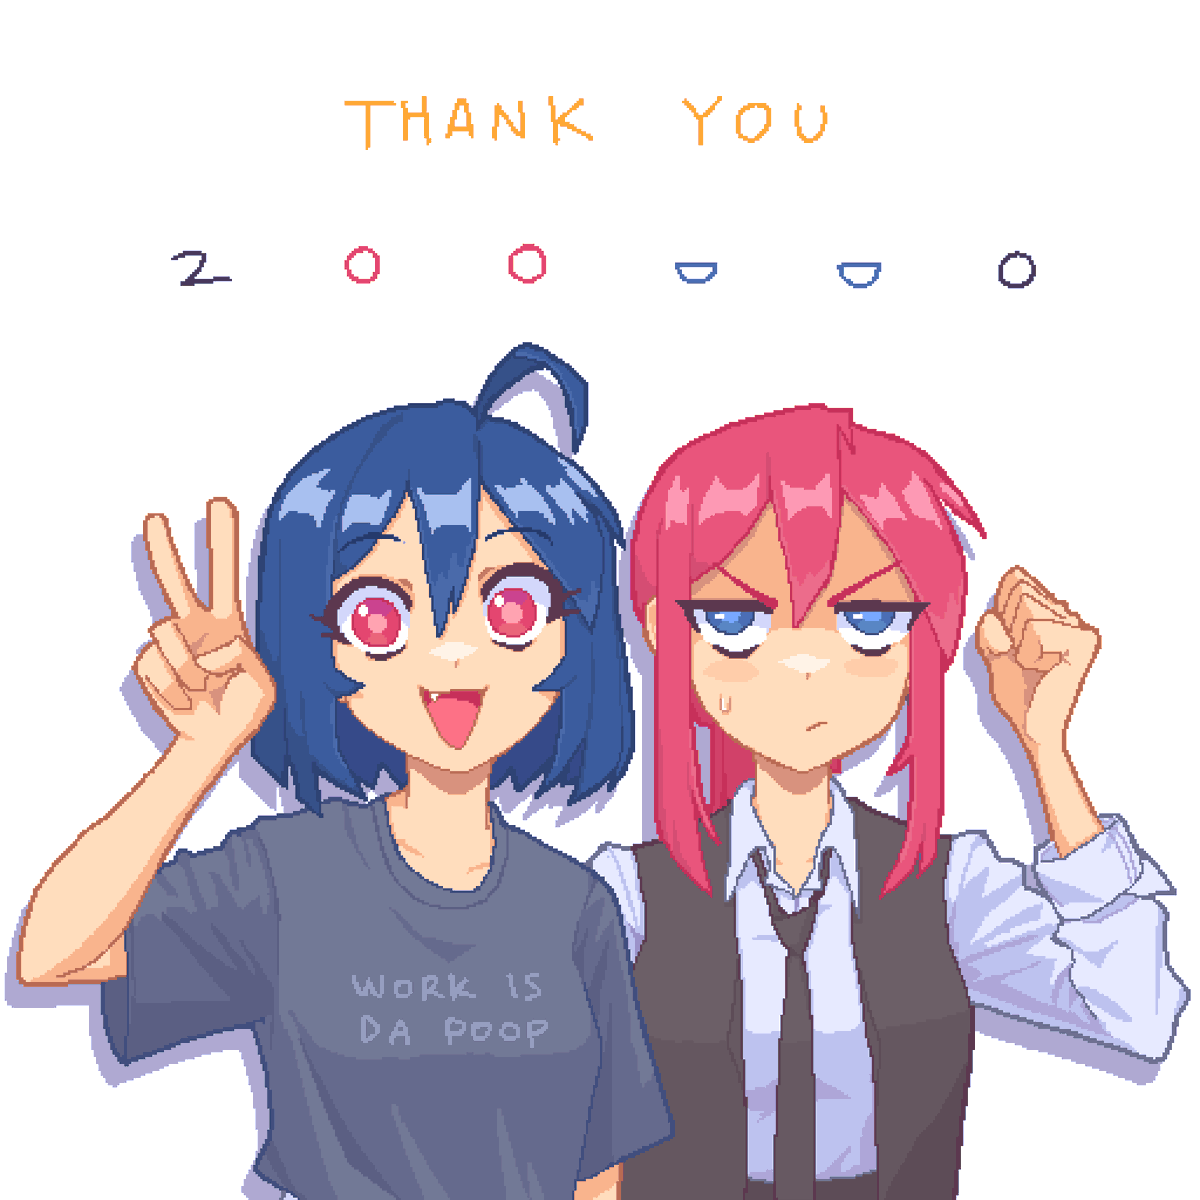 「Thank you for 200k follows! 😭💙💙💙💙 」|hcnoneのイラスト